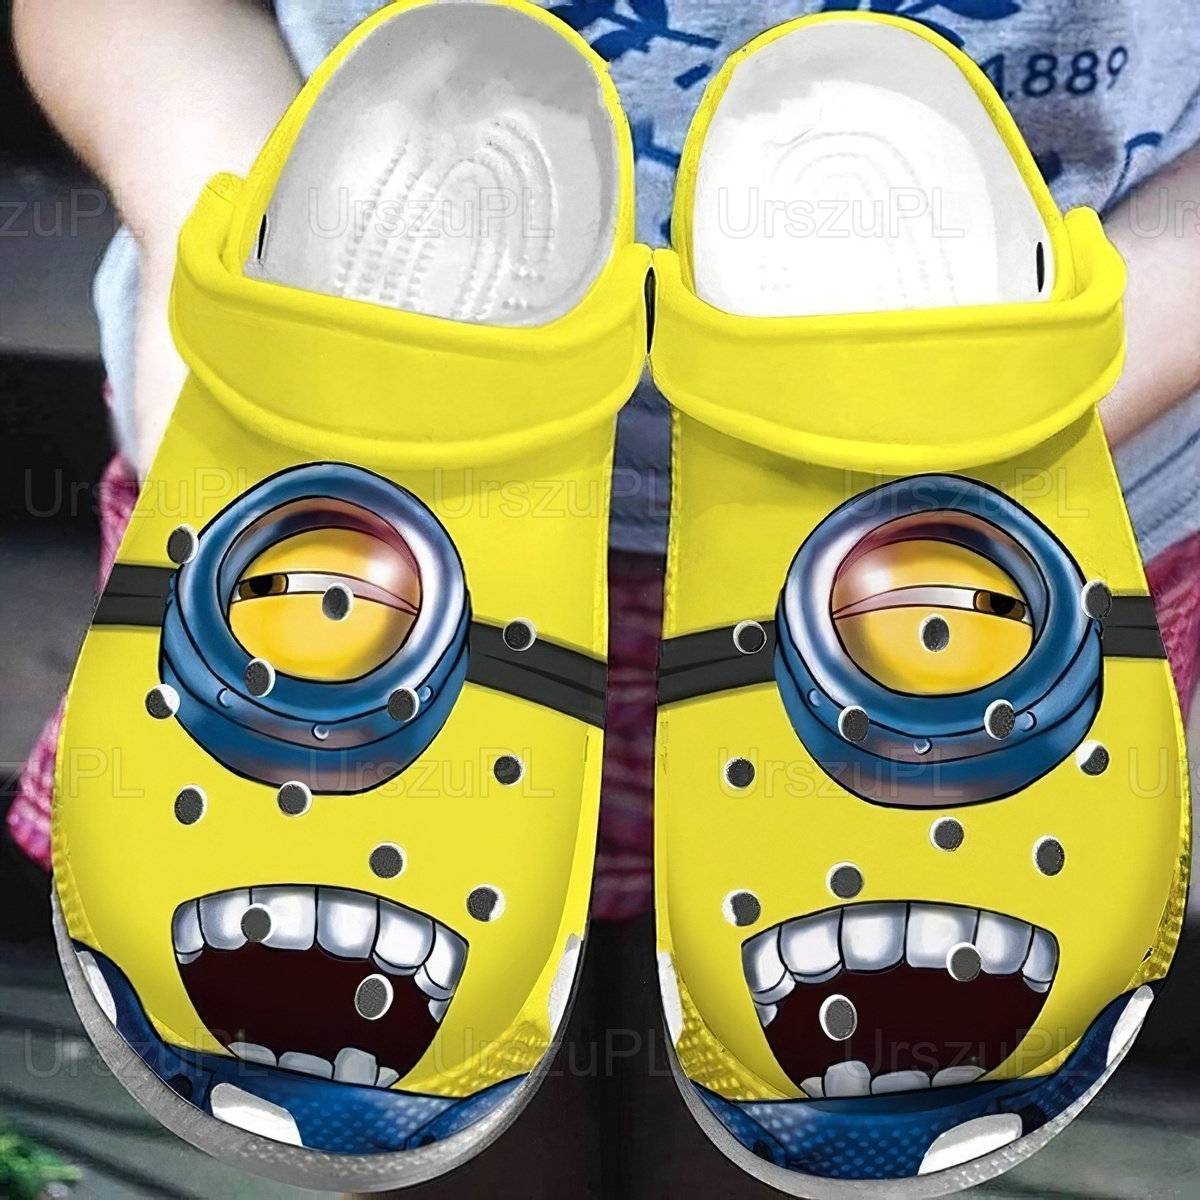 Minions Face Adorable Unisex Clogs Disney Inspired Fun Sandal Gift